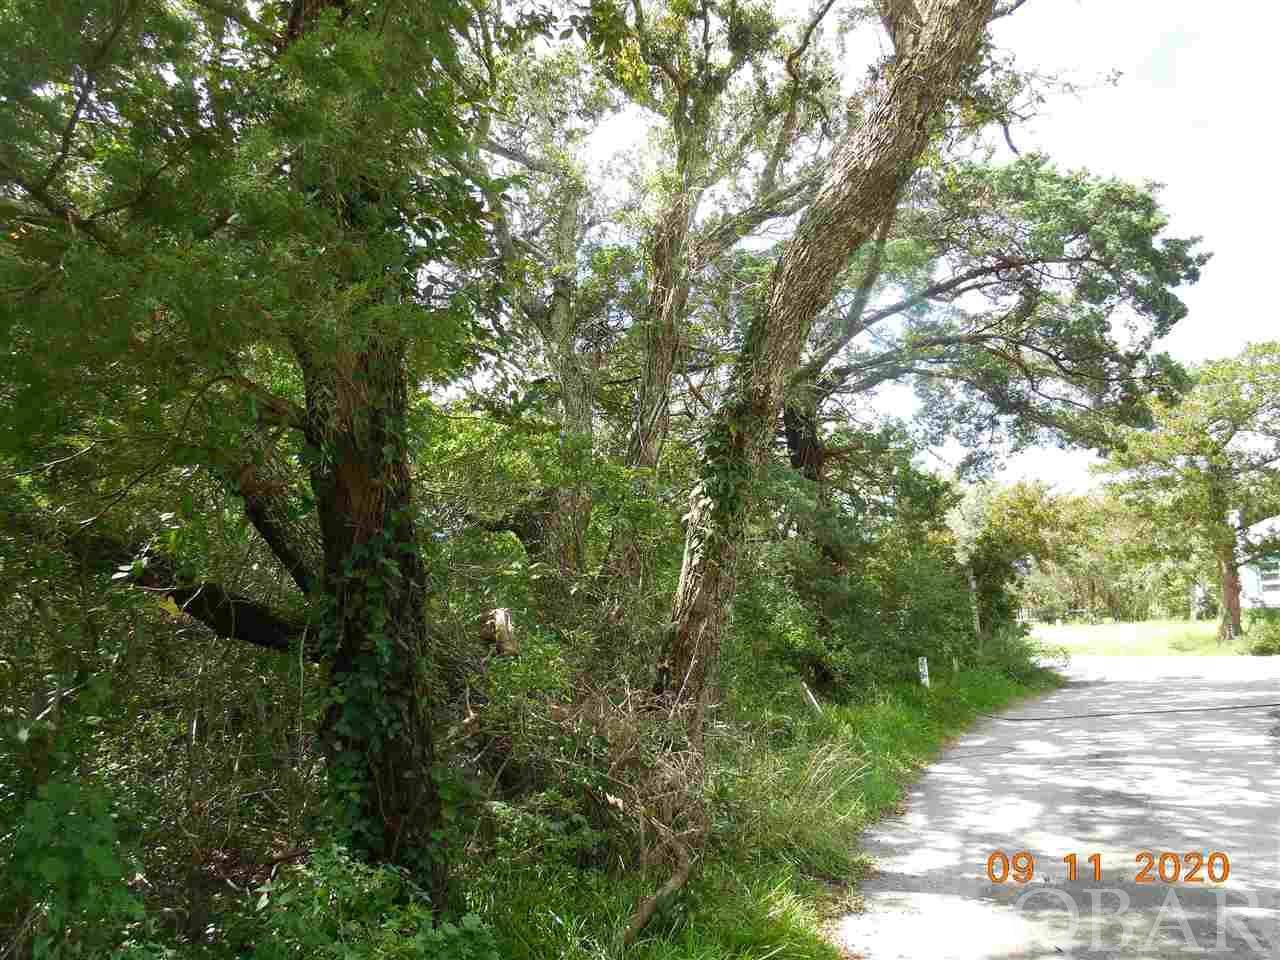 A 6,837 sq. ft. lot on Martha Jane Lane within walking distance to the Ocracoke Lighthouse, Silver Lake and Springer's Point Preserve! A wonderful part of the island to call home. No restrictive covenants. Property conveys with a 3 bedroom septic permit. TAX AMOUNT SHOWN IS FOR ALL 3 PARCELS.